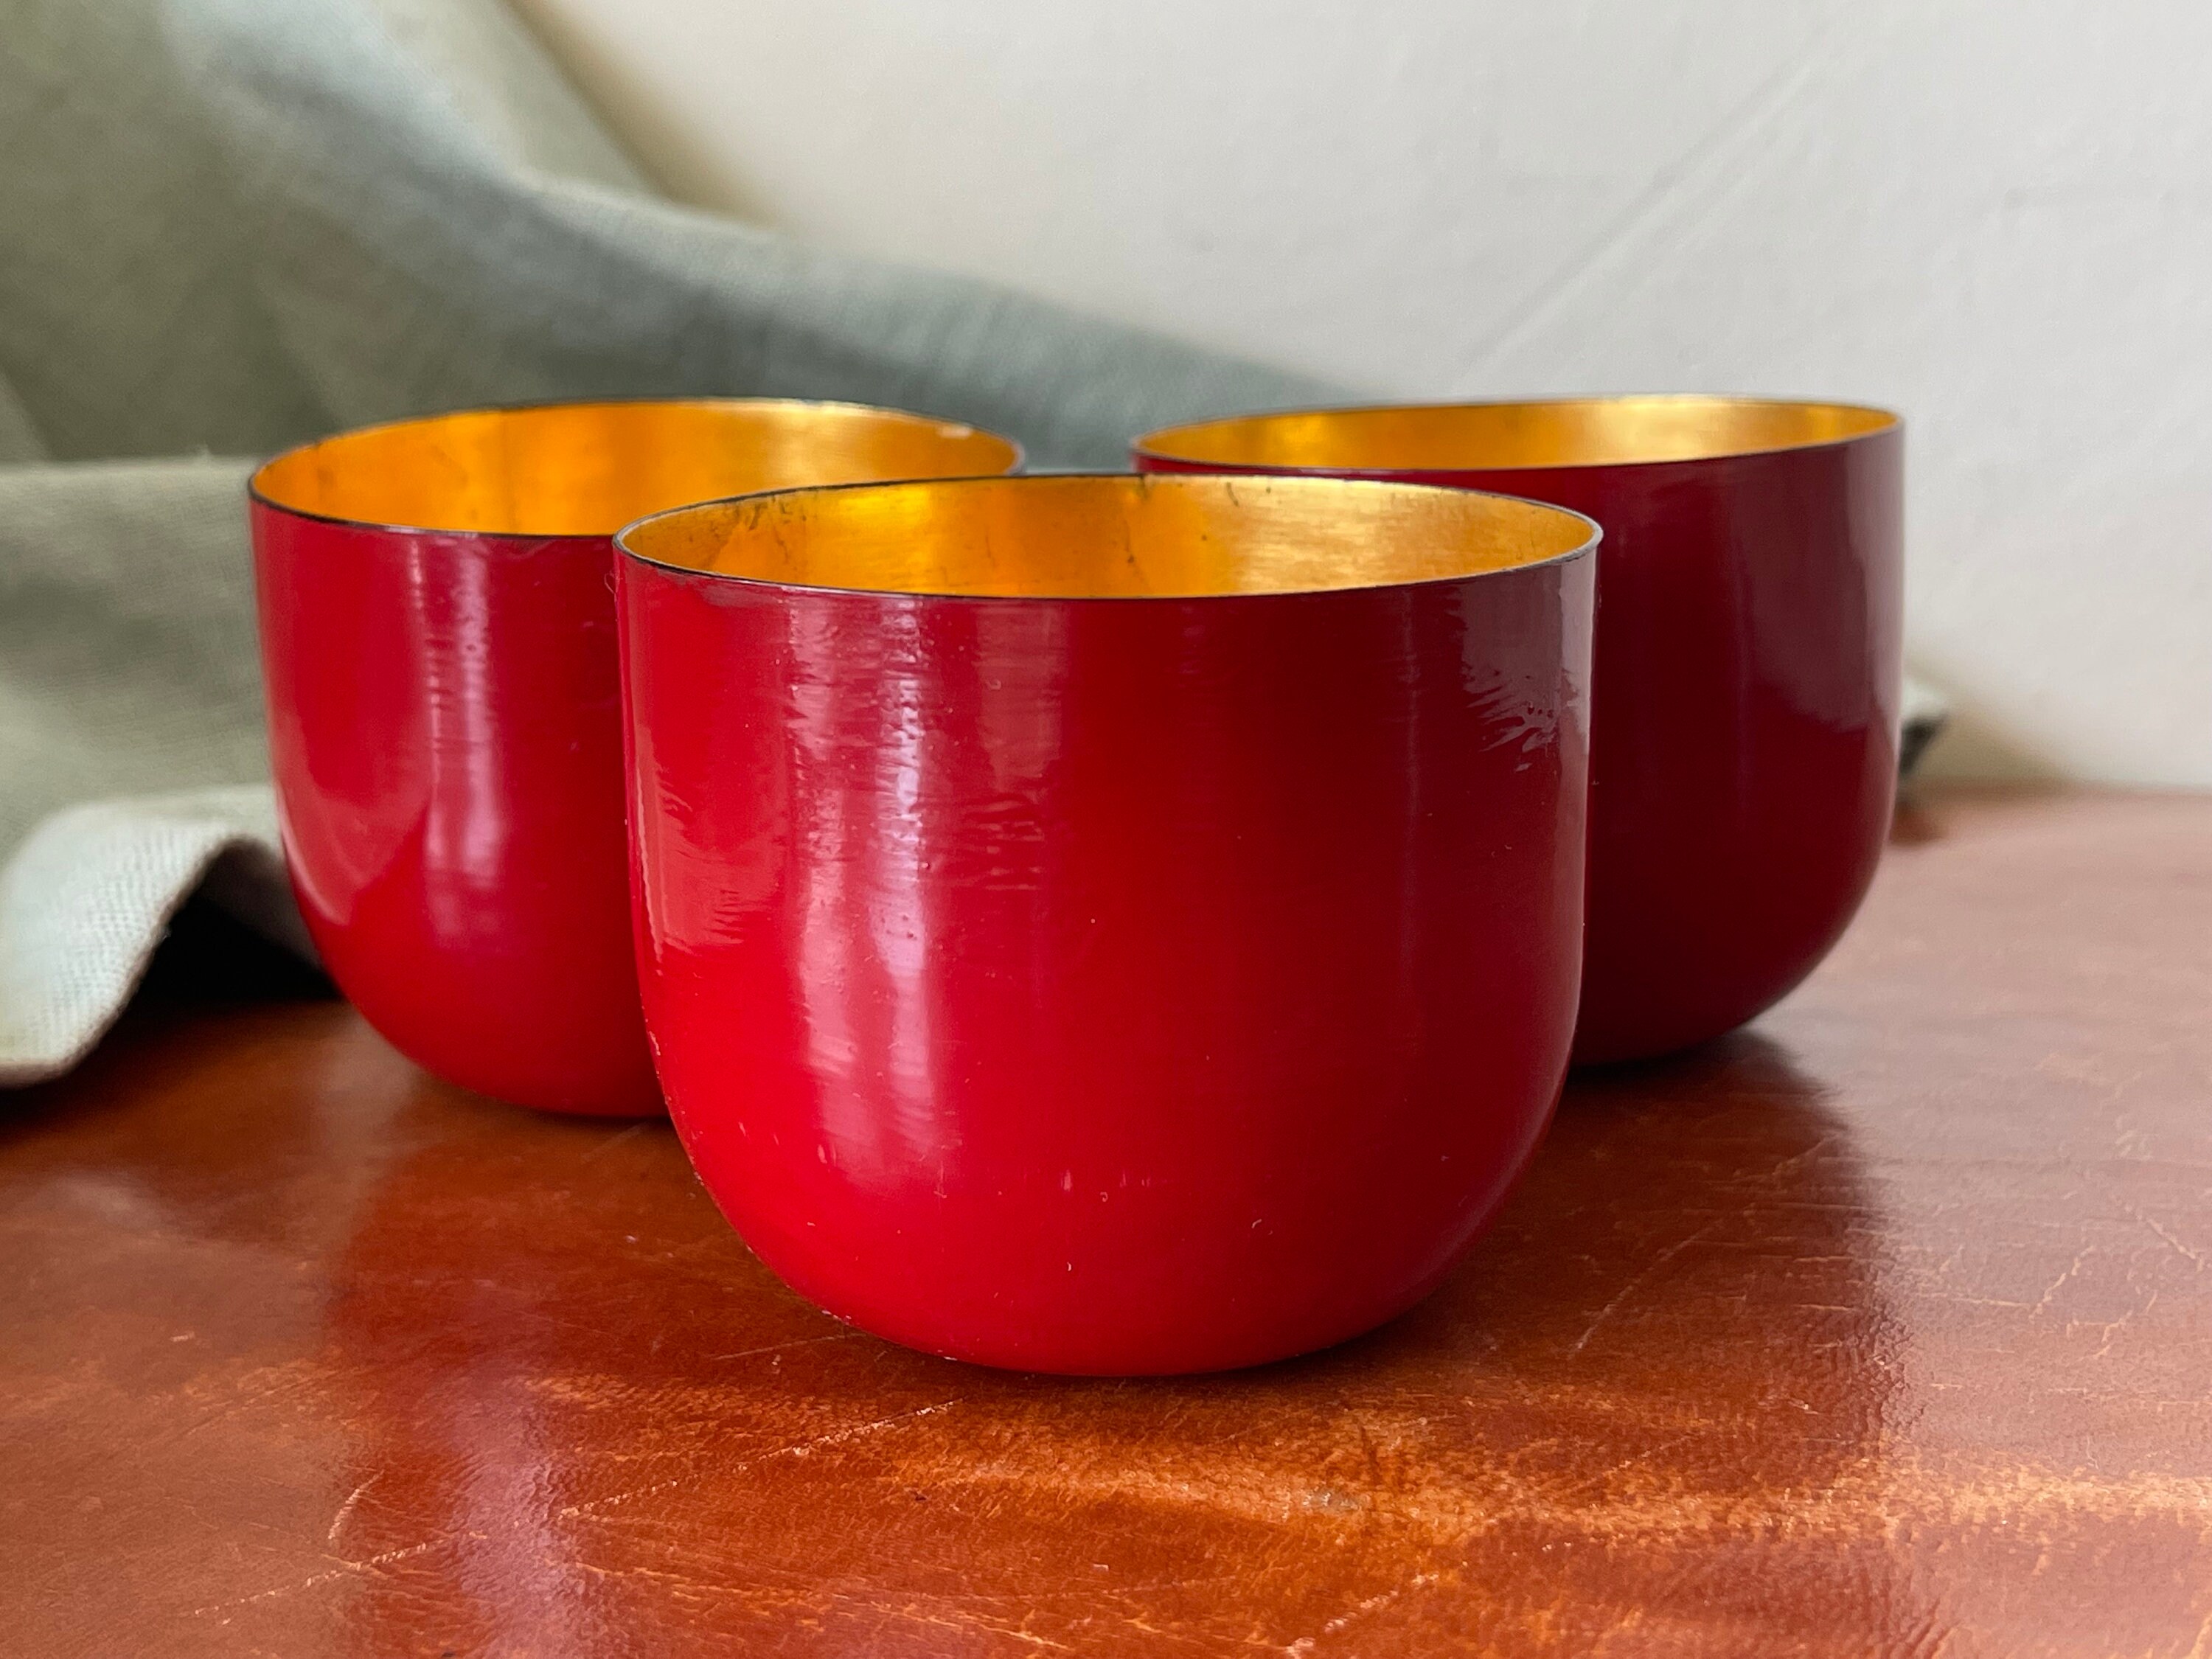 Gold Flower Plastic Lacquer Bowls (5pc) Black & Red - Merae